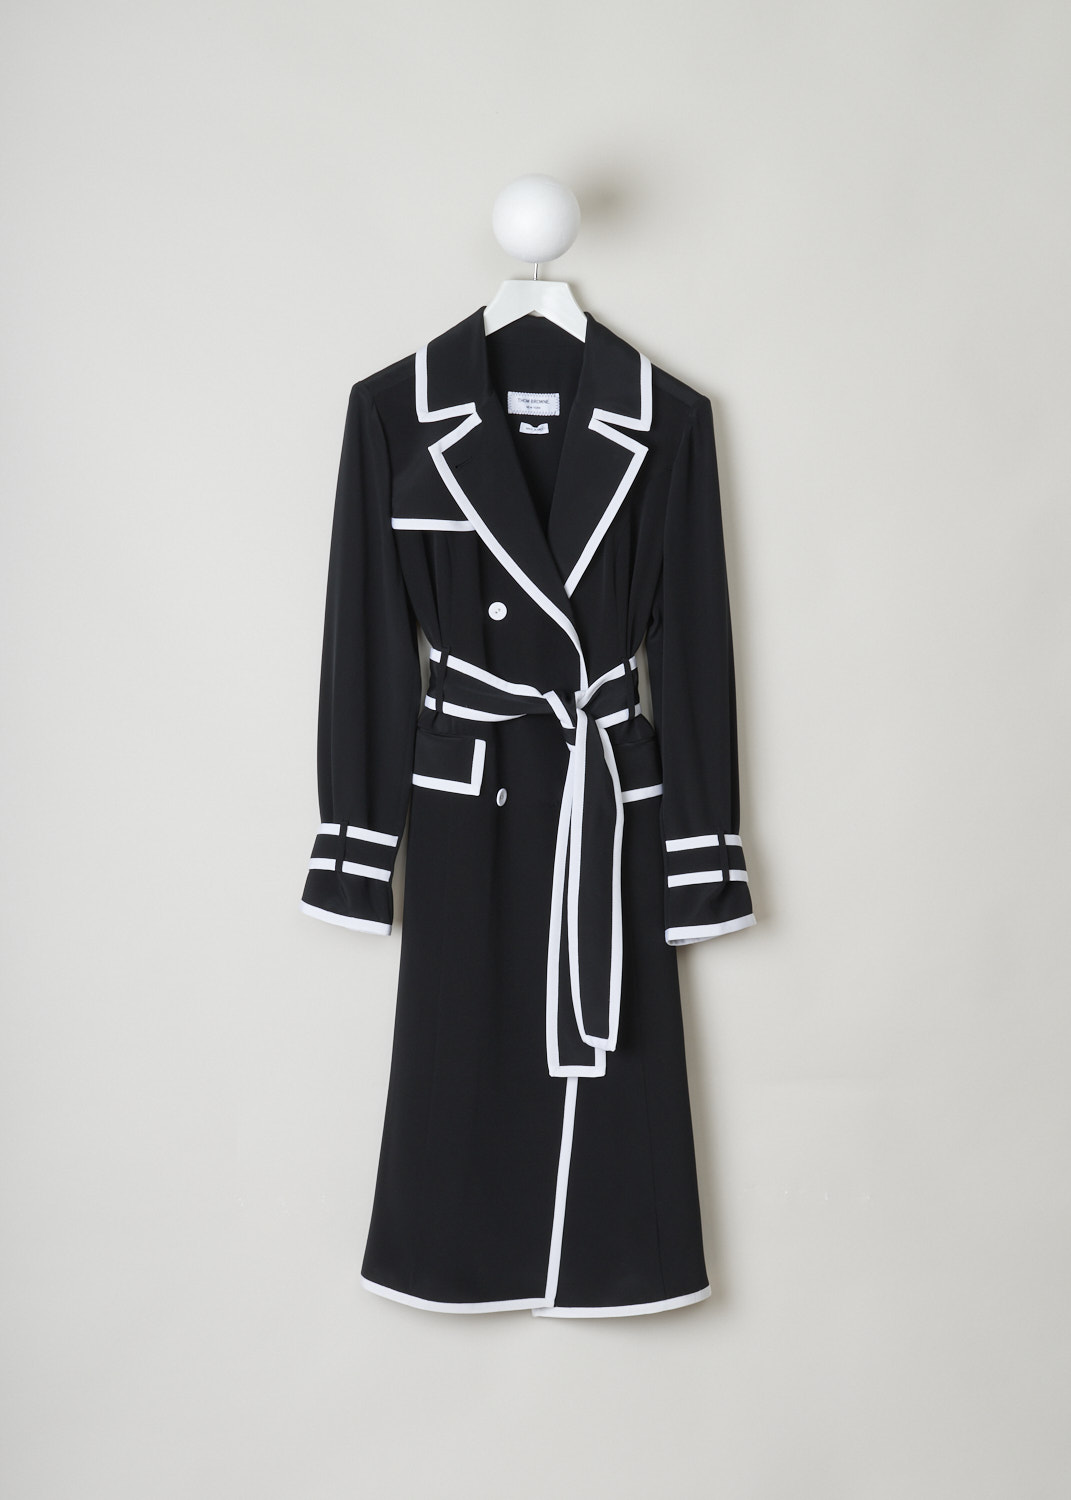 Thom Browne, Black trench neckline dress with contrasting white trim, FDSB70B_06391_001, Black, Front, Black dress with white contrasting trim reminiscent of a trench coat. Double breasted buttons decorate the front of the dress, as do the two pockets. Further adorning the front is a storm guard which wraps around to the back. The dress has long sleeves with belted cuffs. The dress comes with a built-in belt around the waist. The signature Grosgrain loop tab can be found on the back of the collar. 